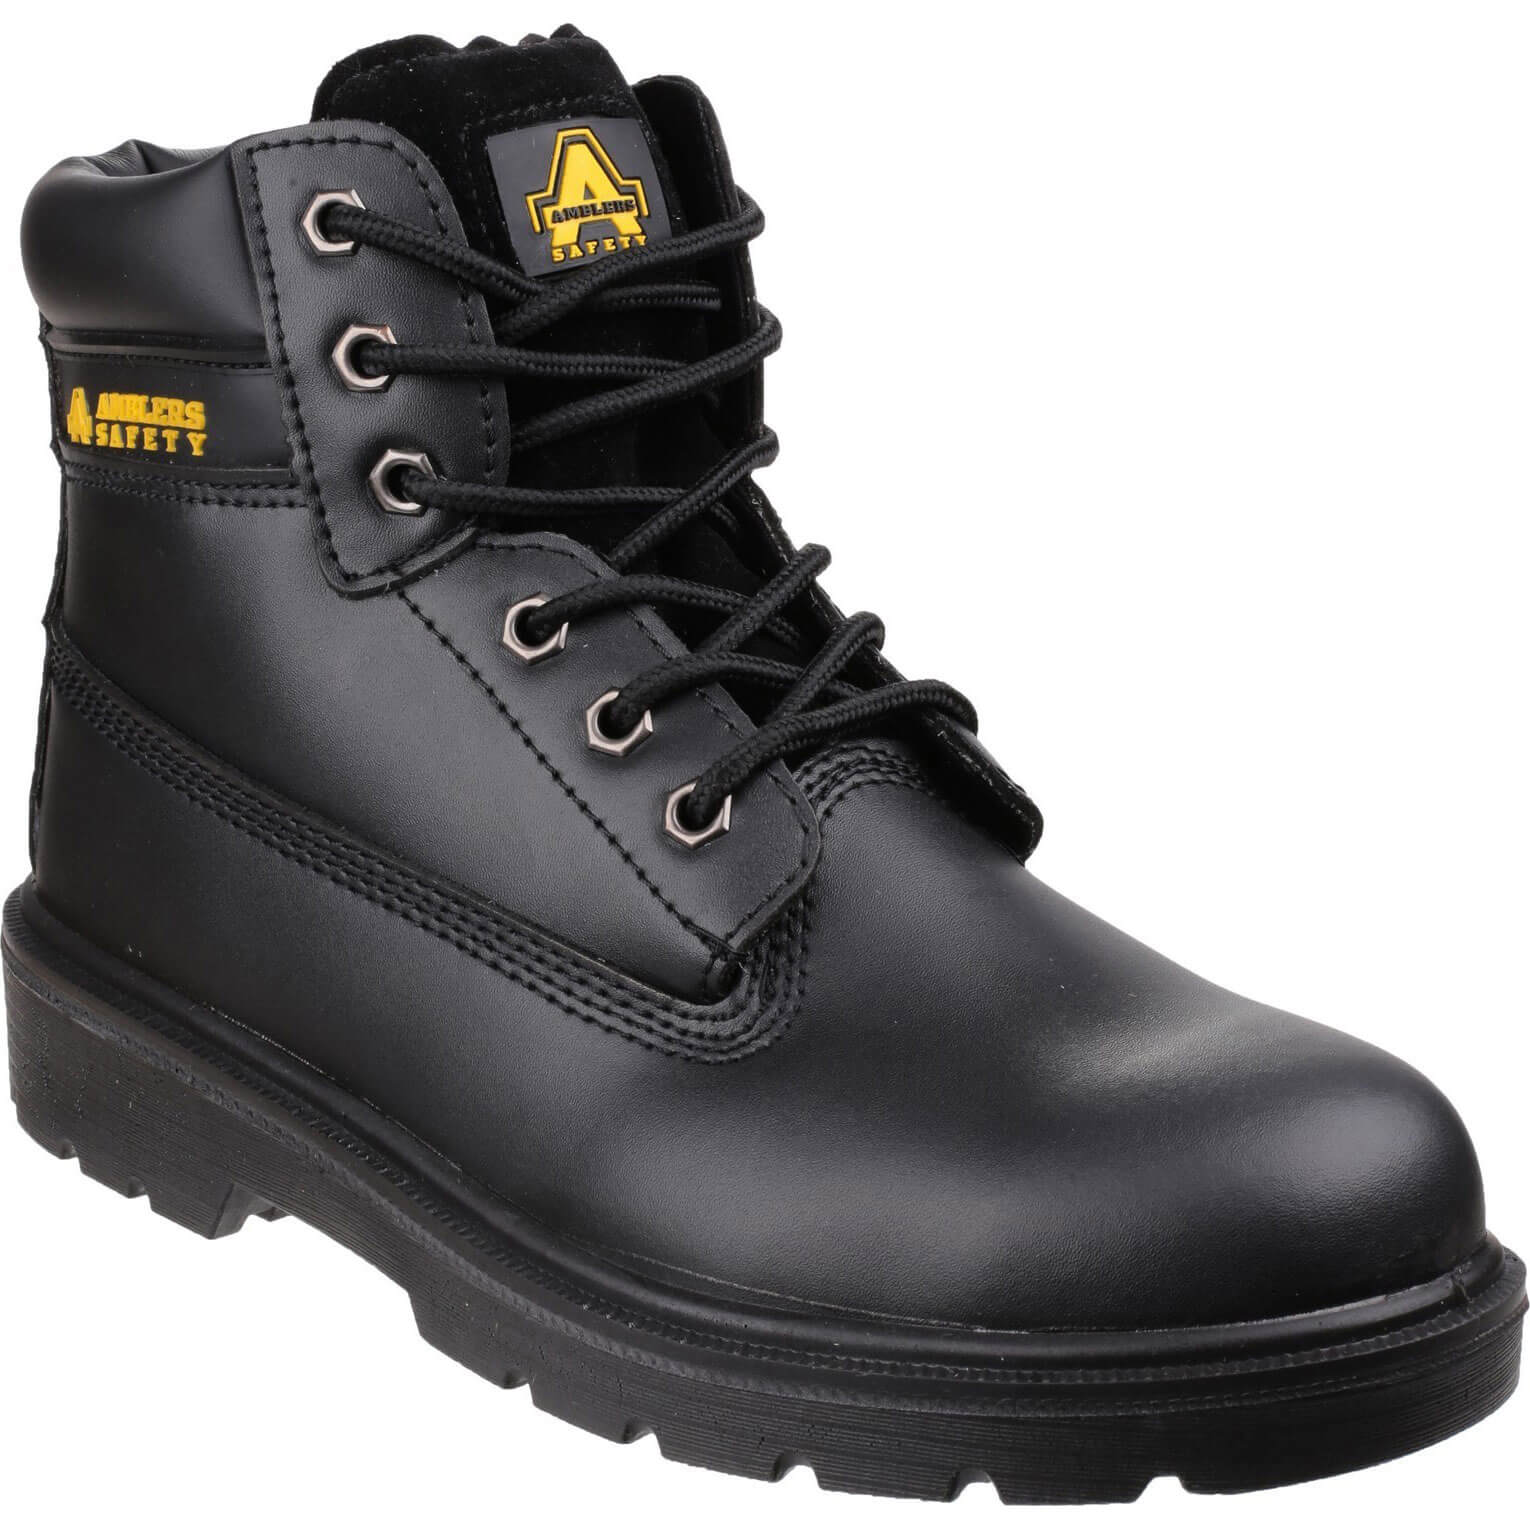 Photo of Amblers Mens Safety Fs112 Safety Boots Black Size 6.5